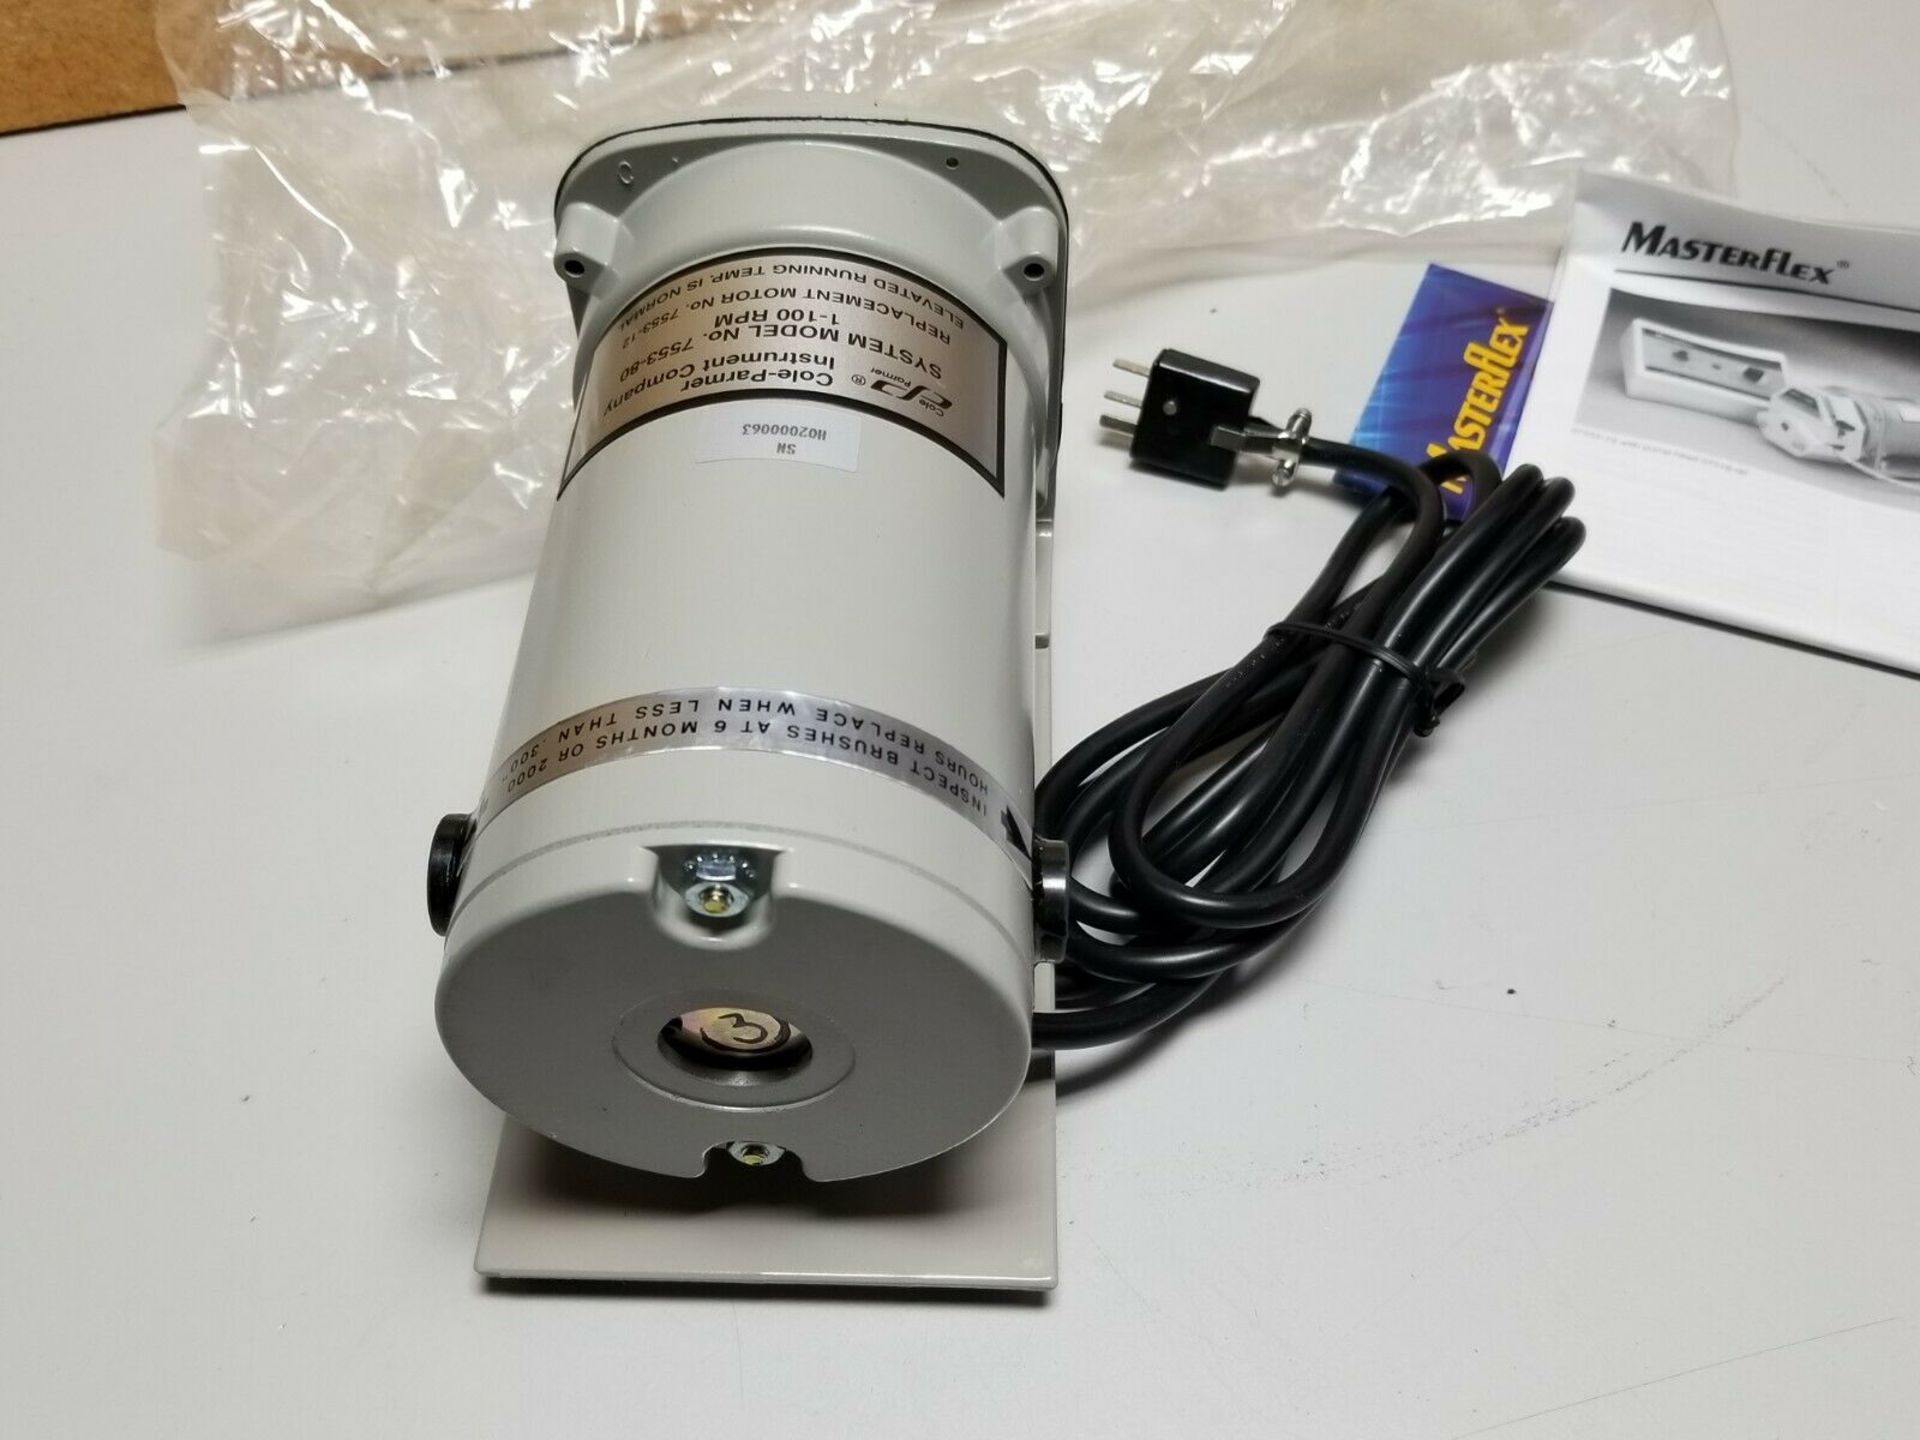 New Cole Parmer Masterflex Pump Drive/Motor - Image 8 of 9